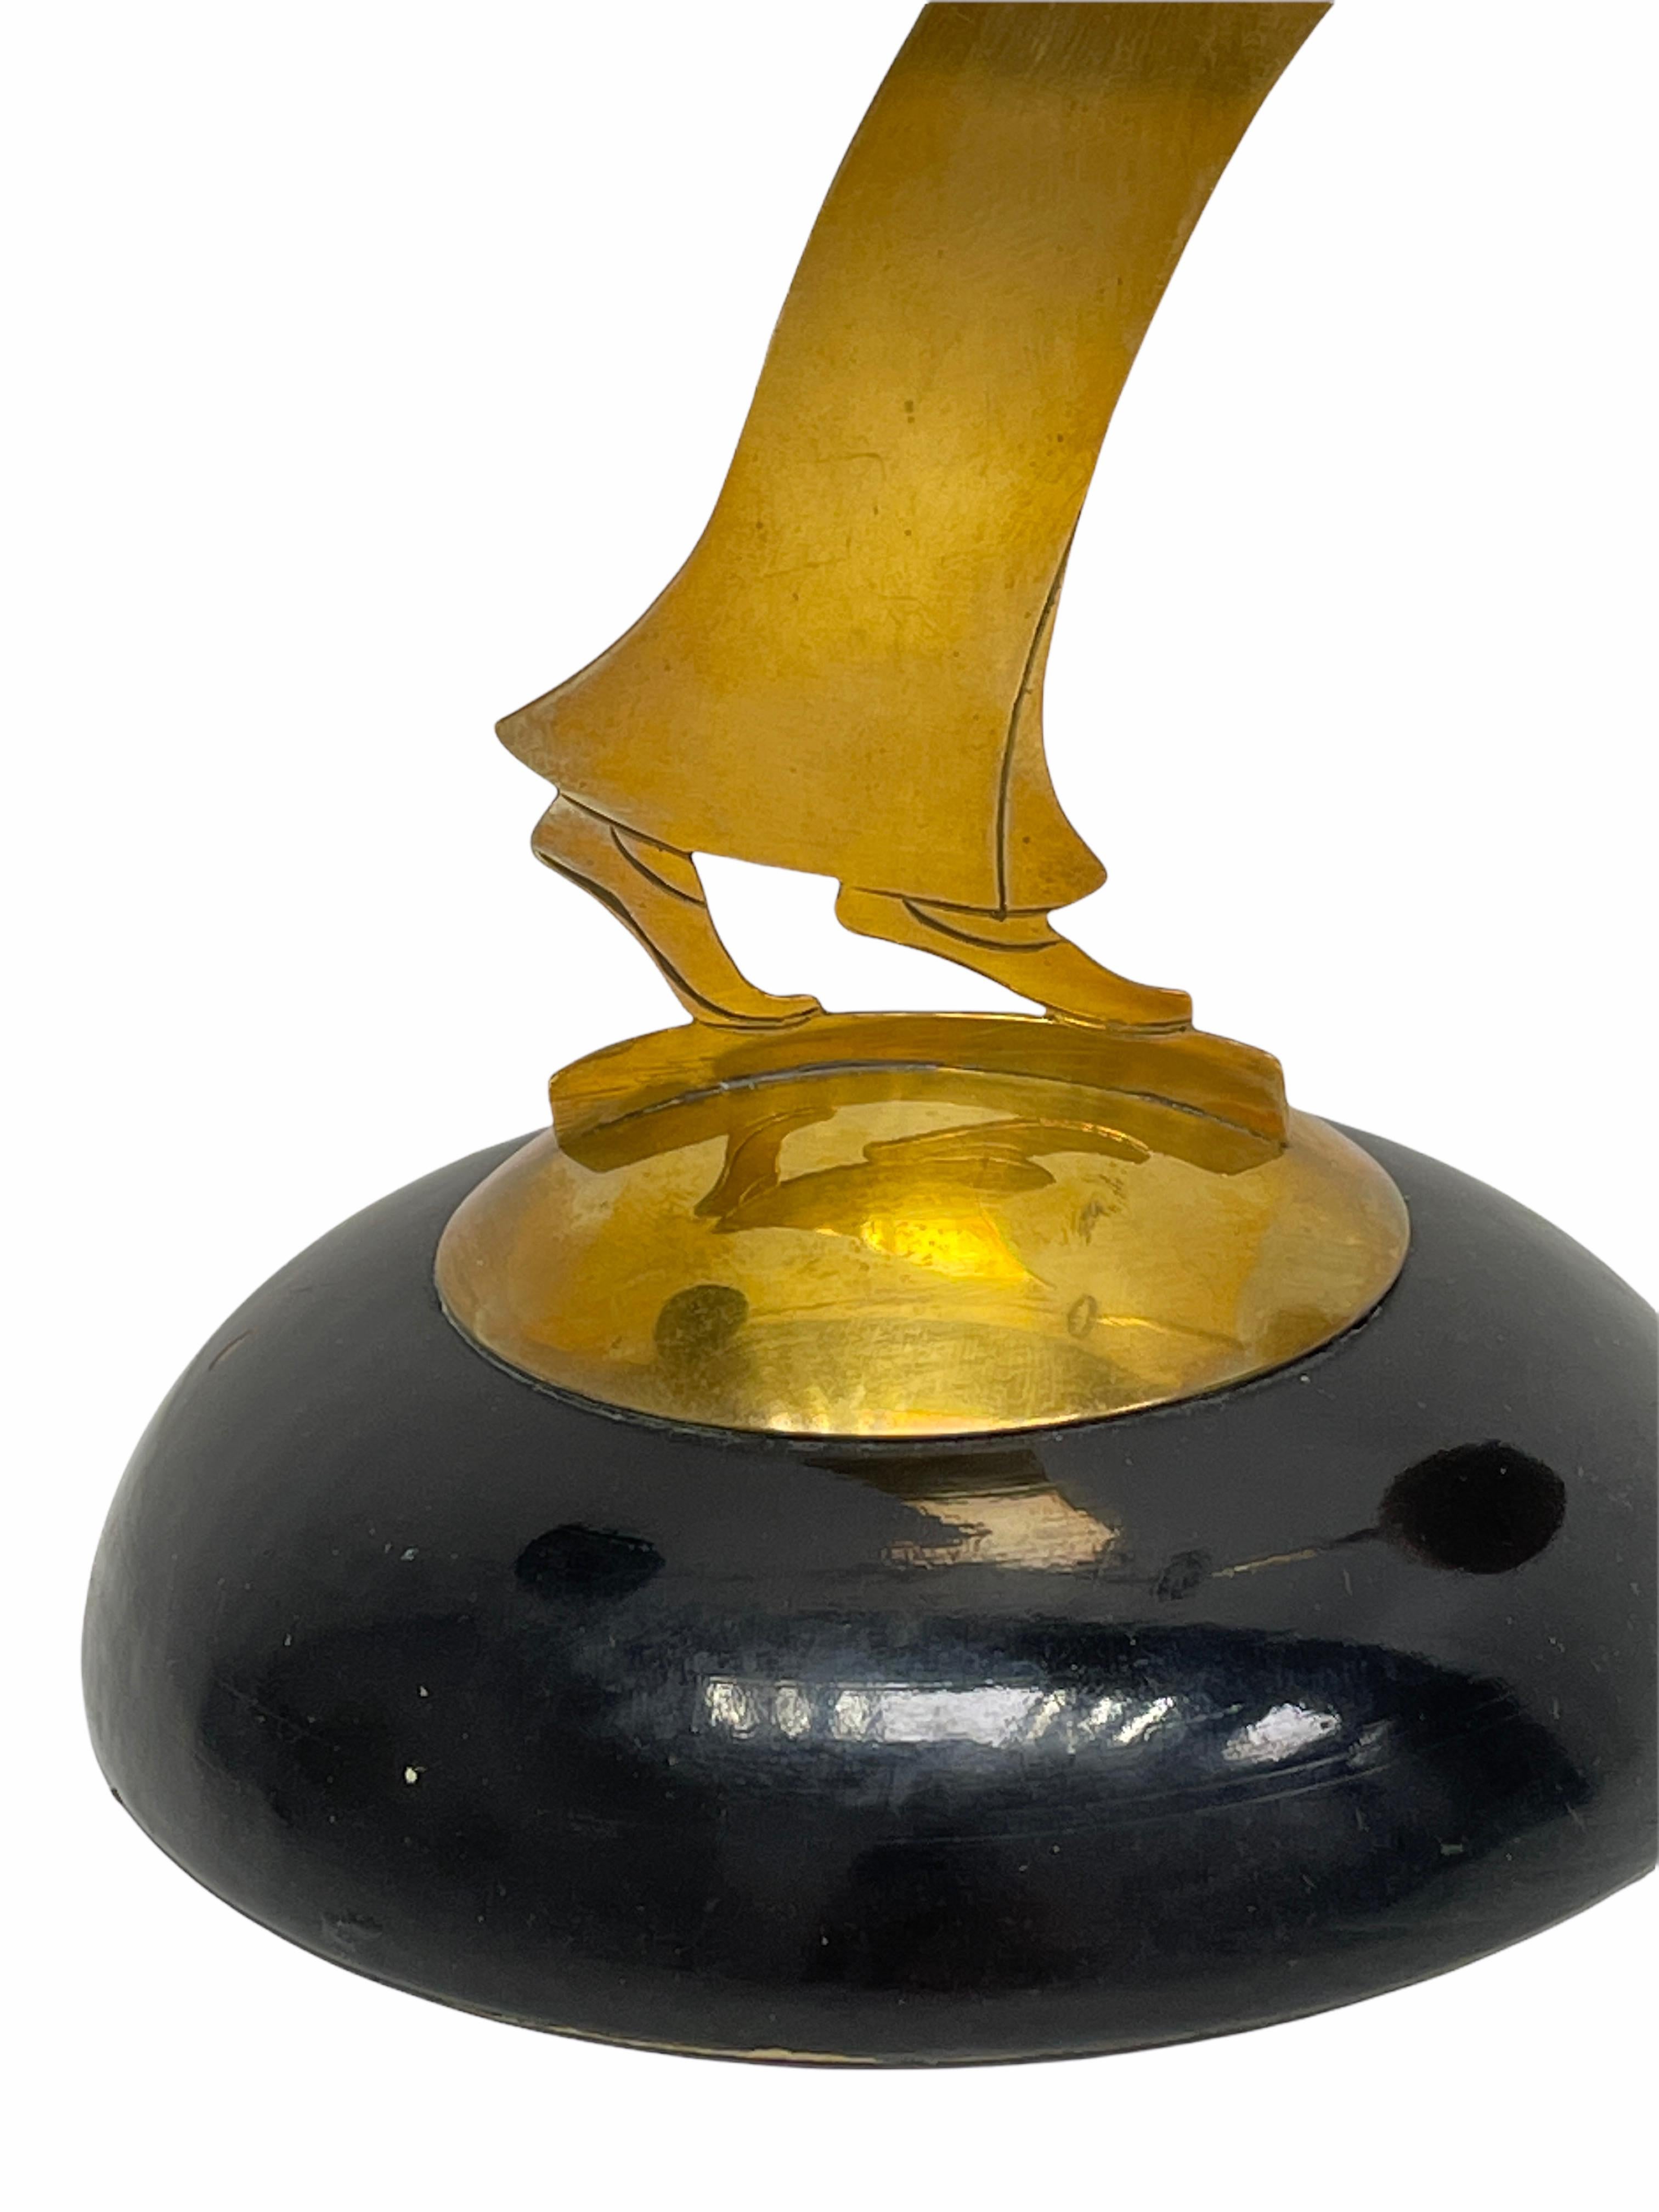 Hand-Crafted Vintage Mid Century Table Bell Geisha Brass Wood Statue, Vienna Austria 1950s For Sale